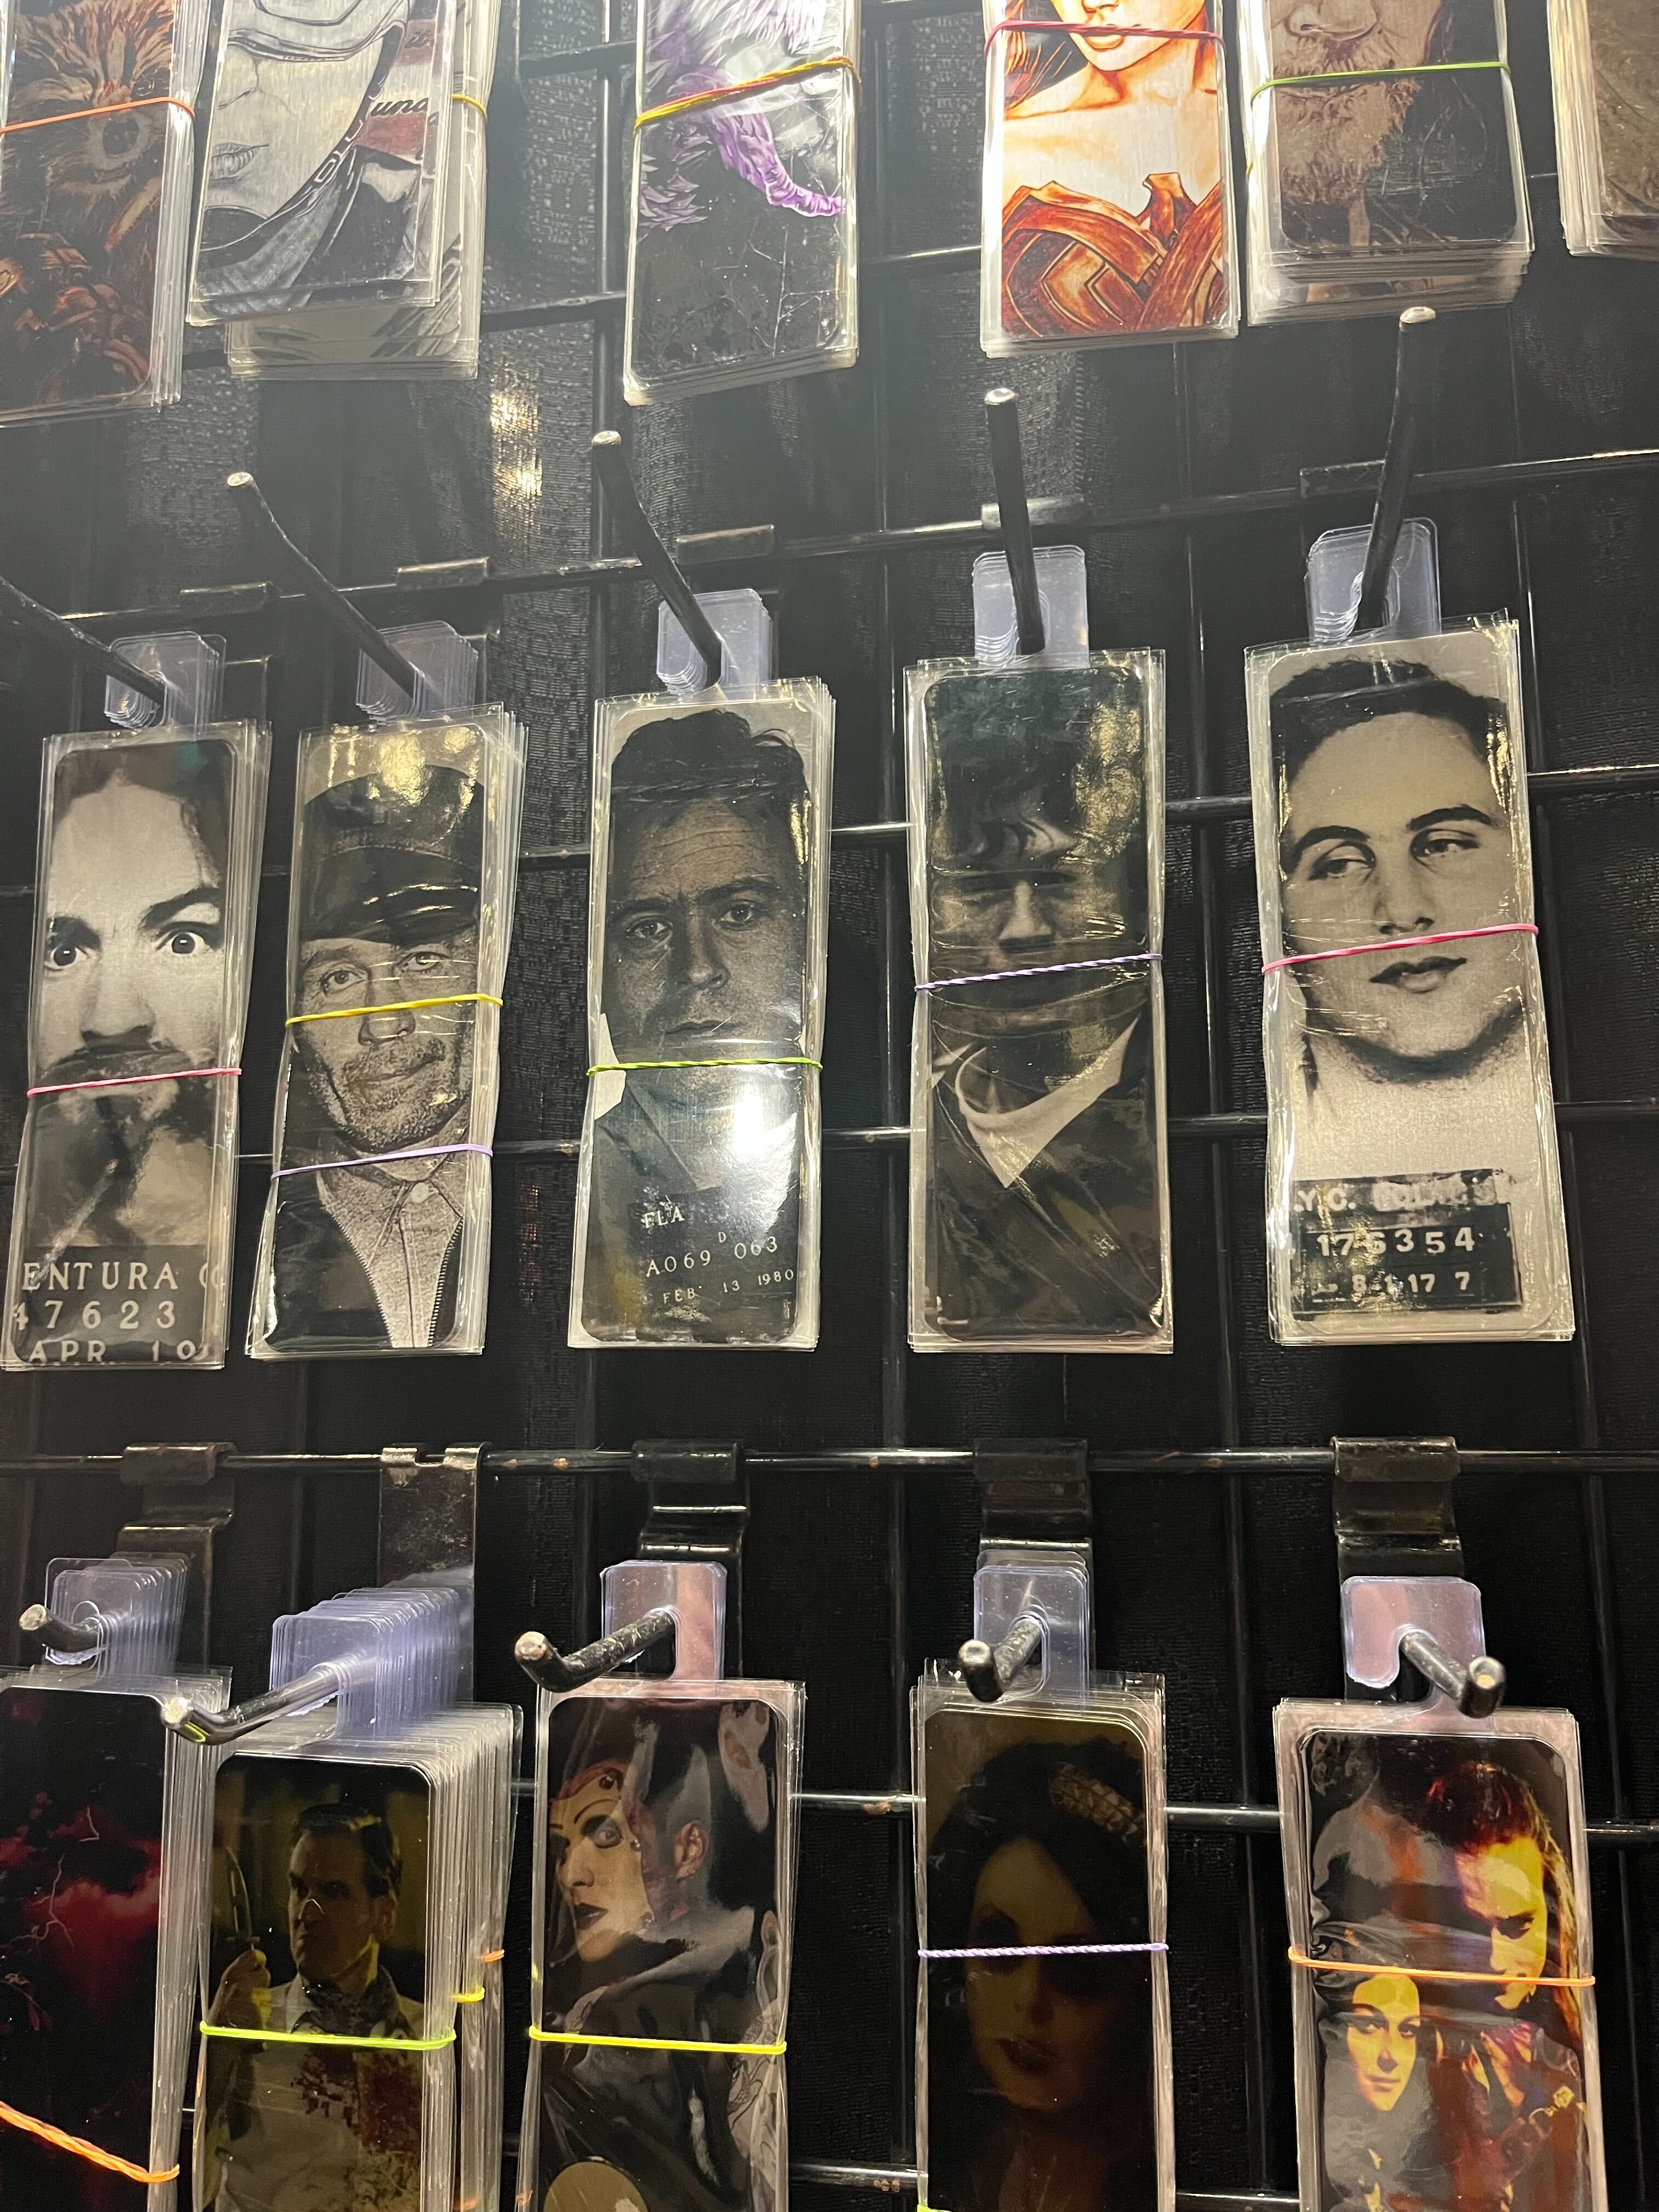 Things you can buy at comic con - bookmarks